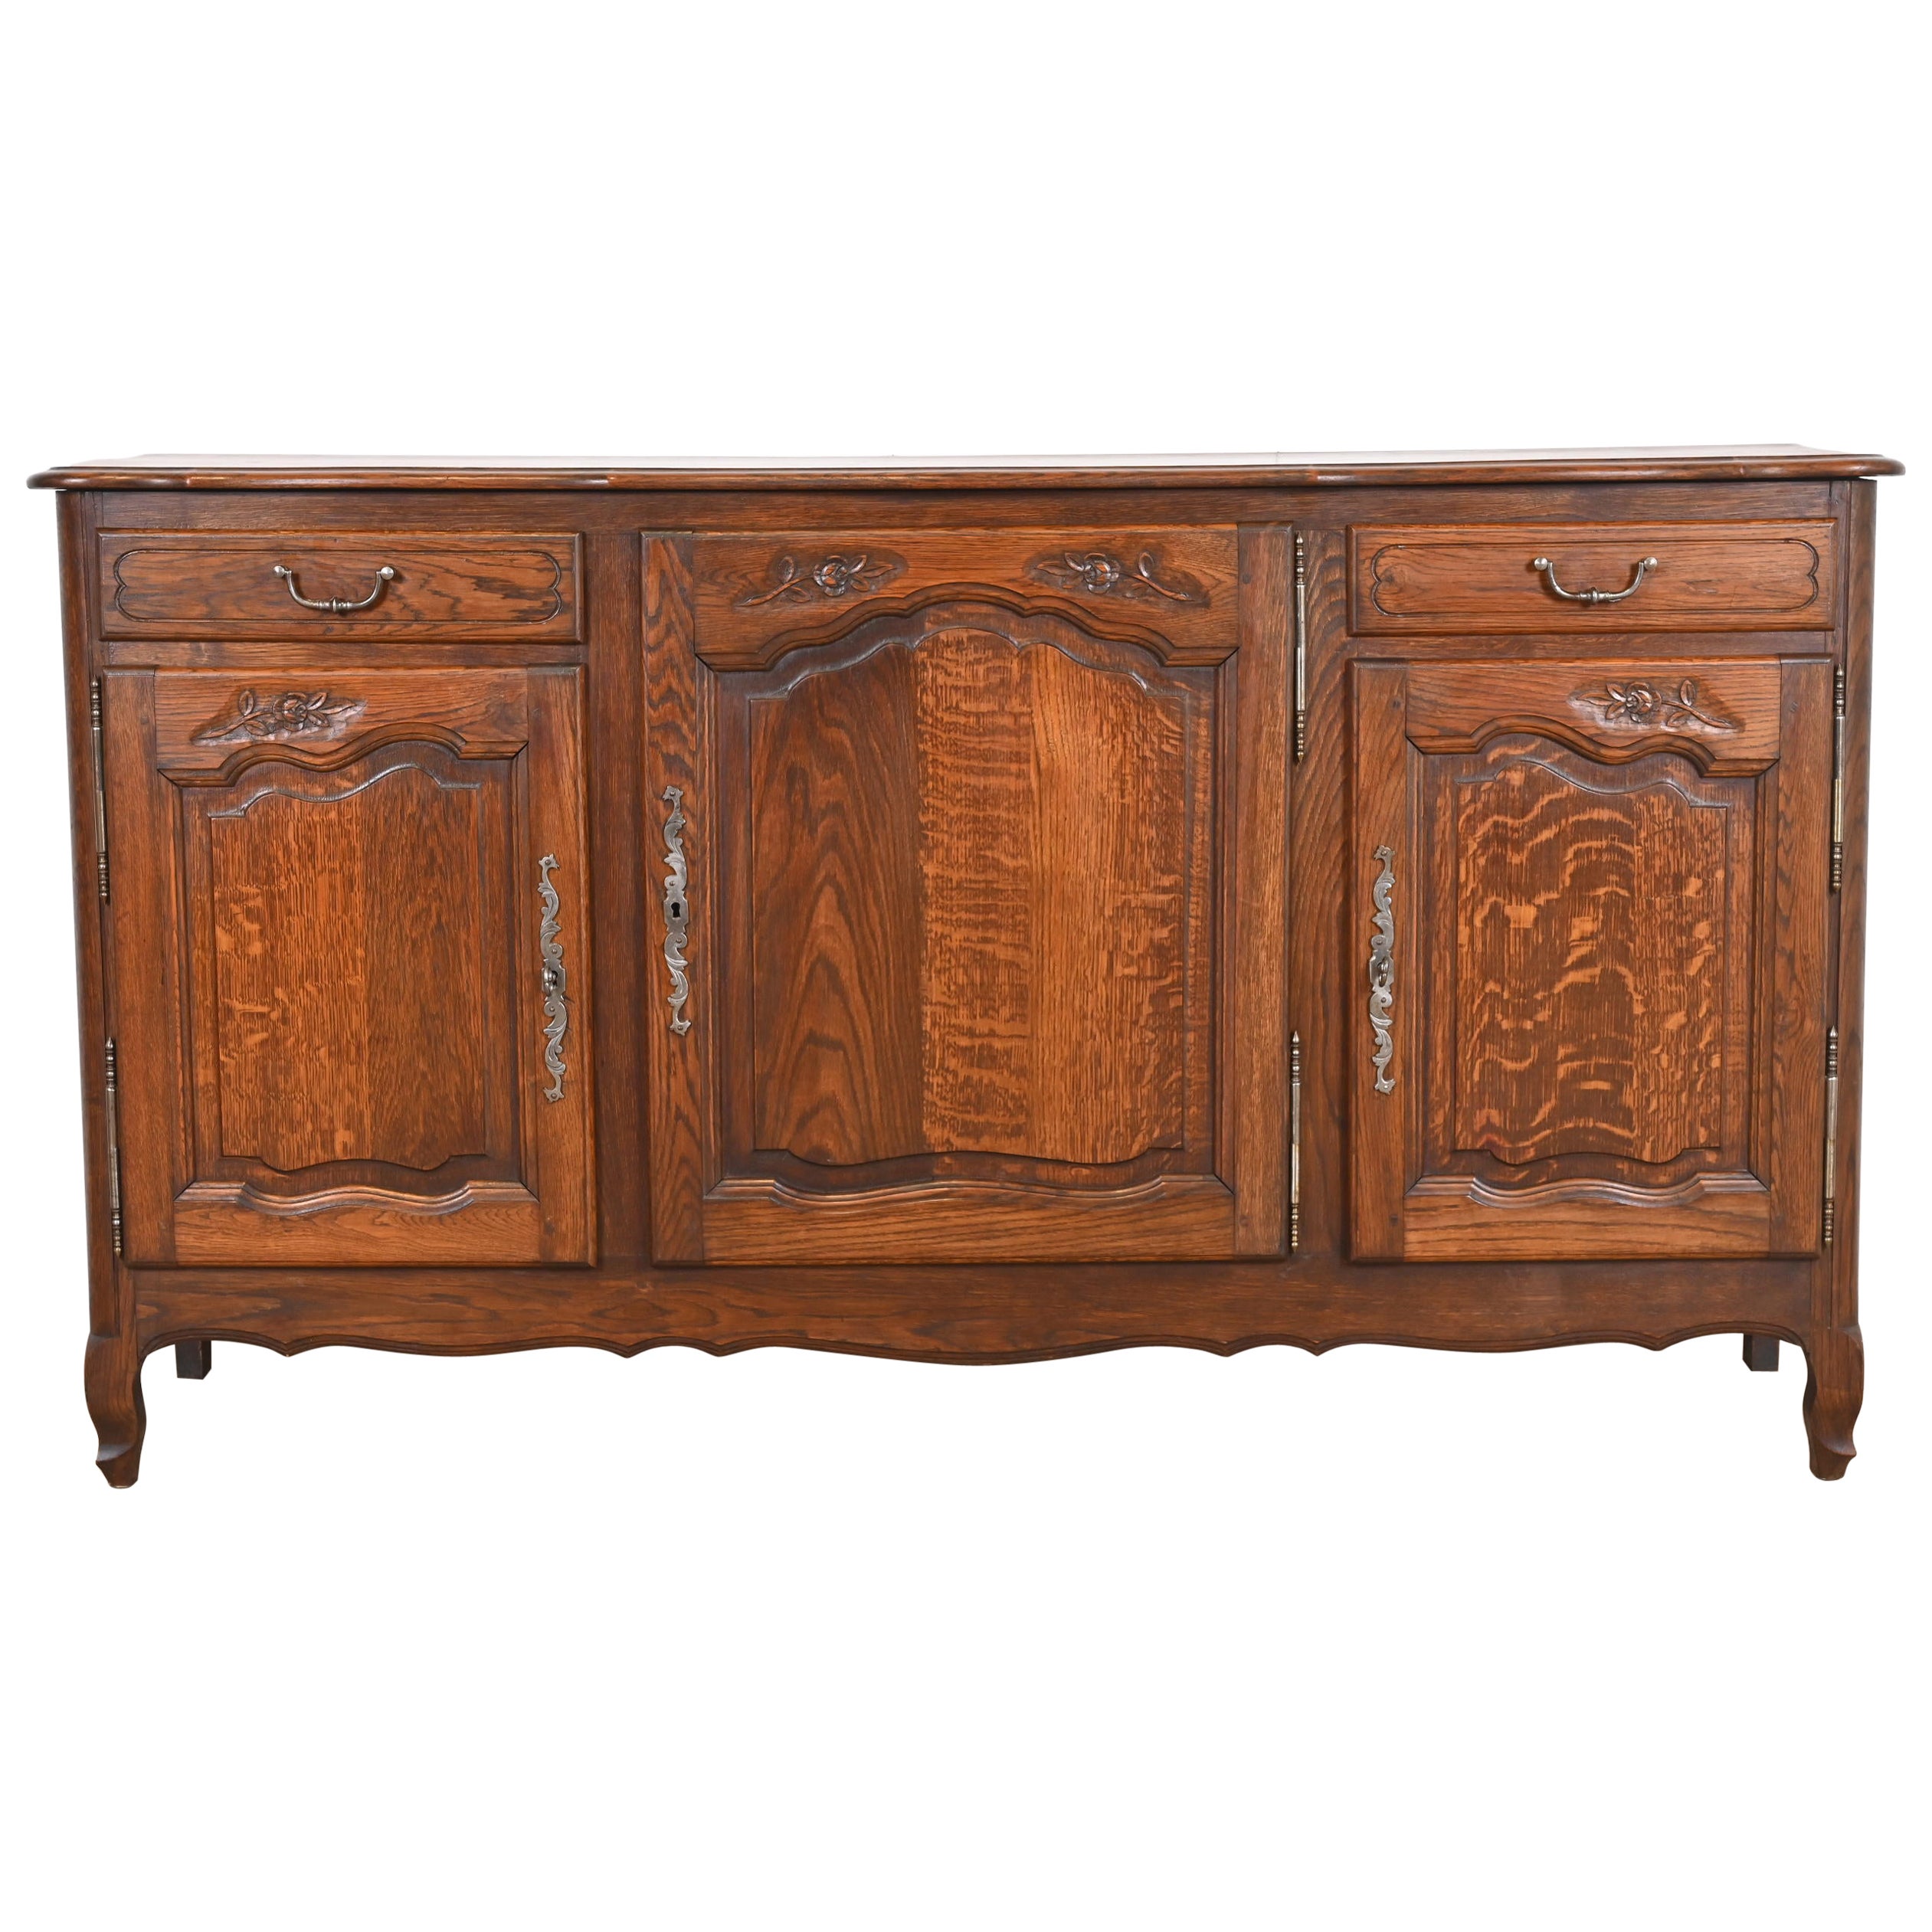 Antique French Provincial Louis XV Carved Oak Sideboard or Bar Cabinet